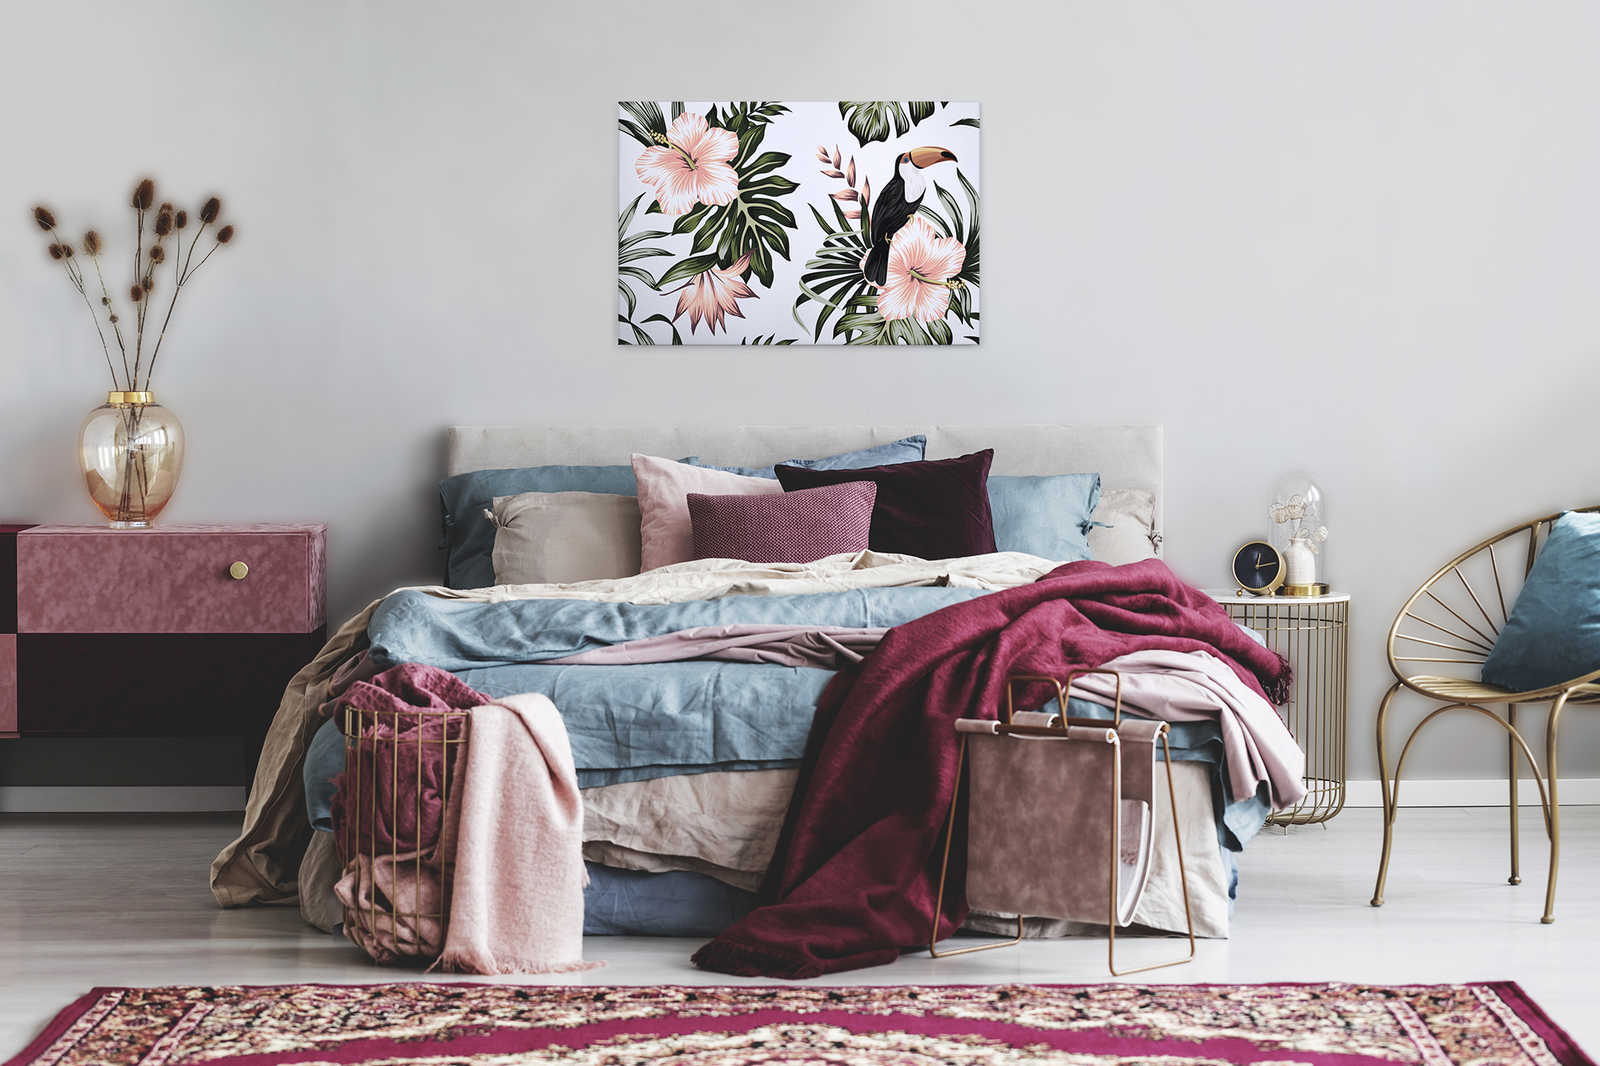             Canvas with Jungle Plants and Pelican | White, Pink, Green - 0.90 m x 0.60 m
        